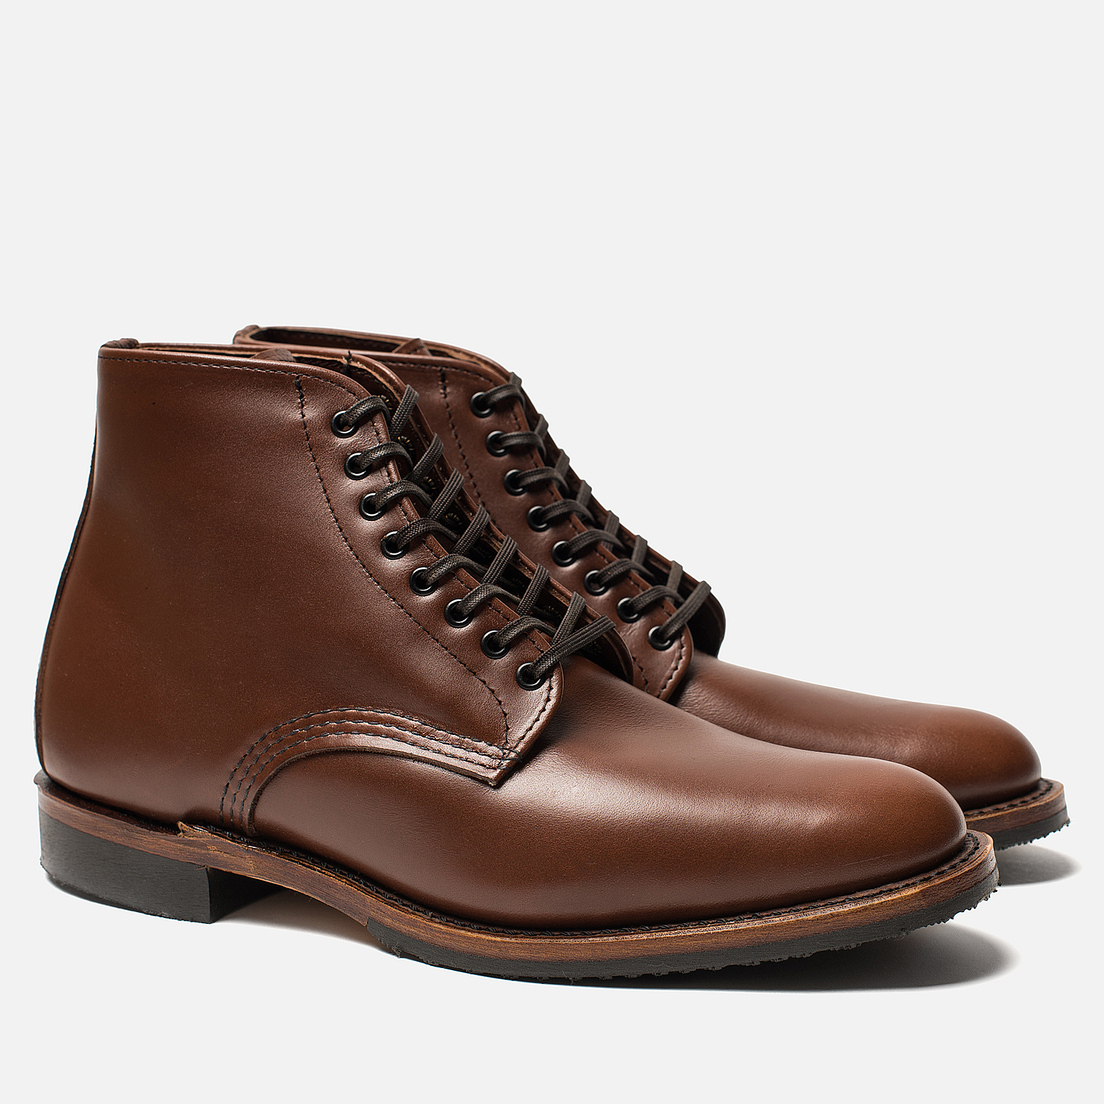 Red Wing Shoes Мужские ботинки Williston 6-inch Featherstone Leather